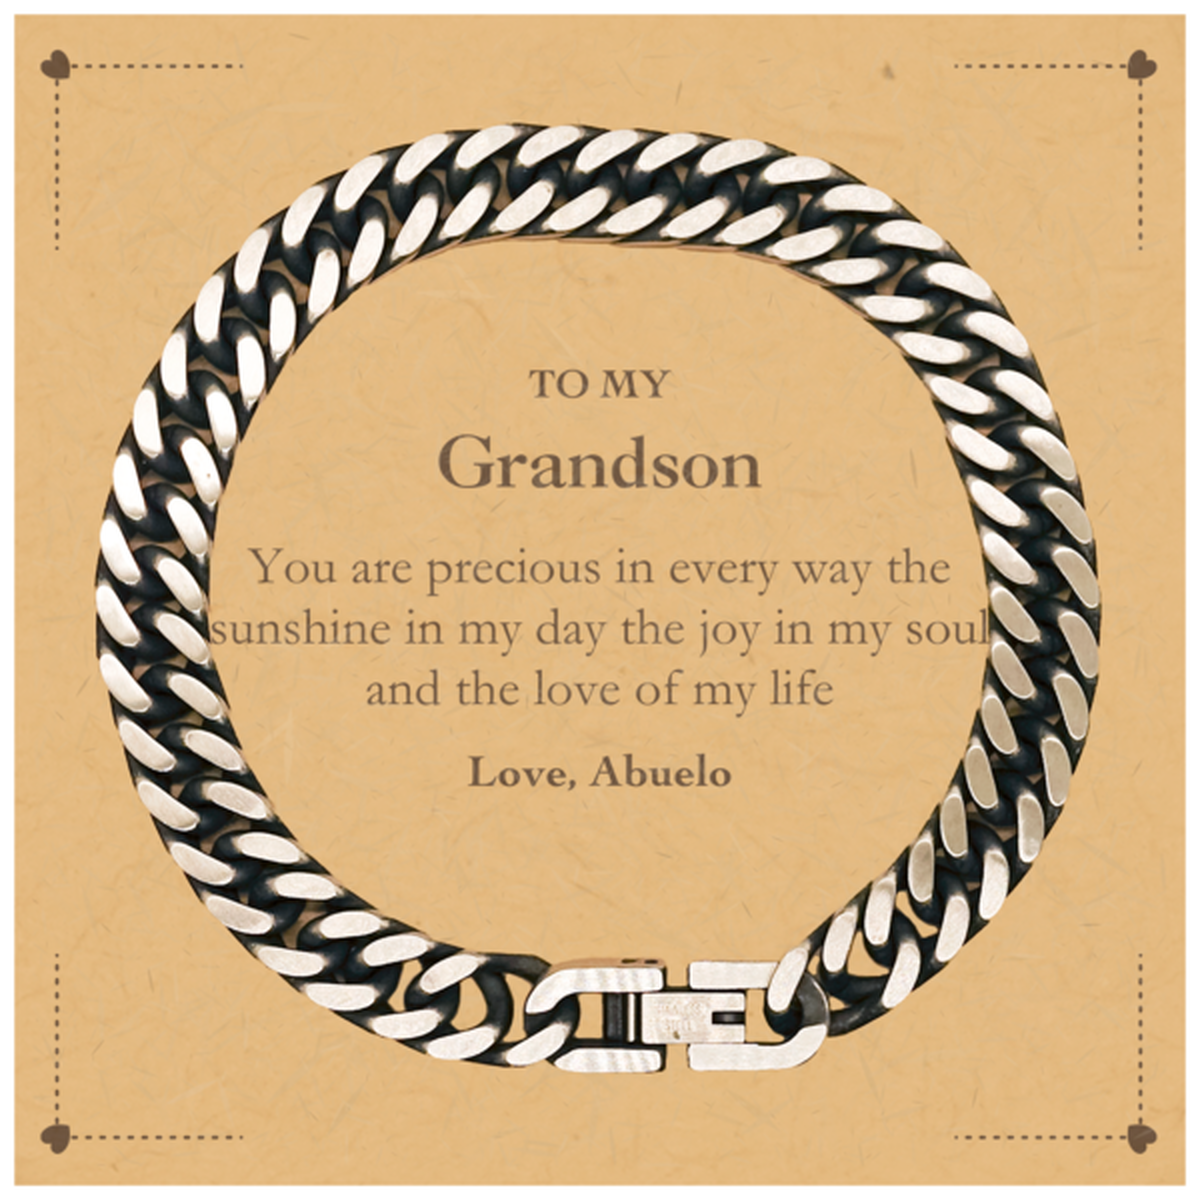 Graduation Gifts for Grandson Cuban Link Chain Bracelet Present from Abuelo, Christmas Grandson Birthday Gifts Grandson You are precious in every way the sunshine in my day. Love, Abuelo